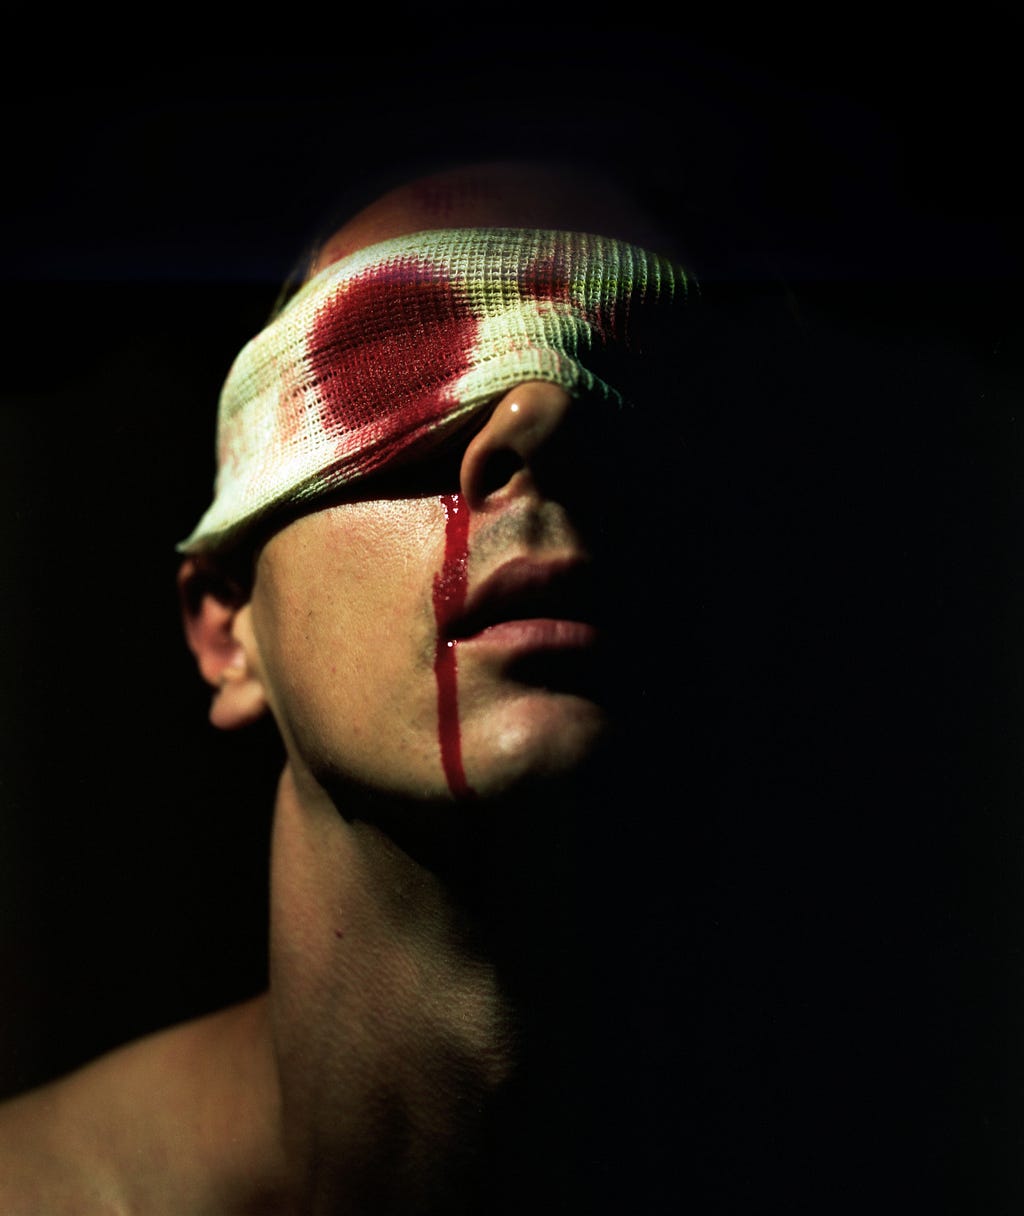 A man with bloody bandages on his eyes